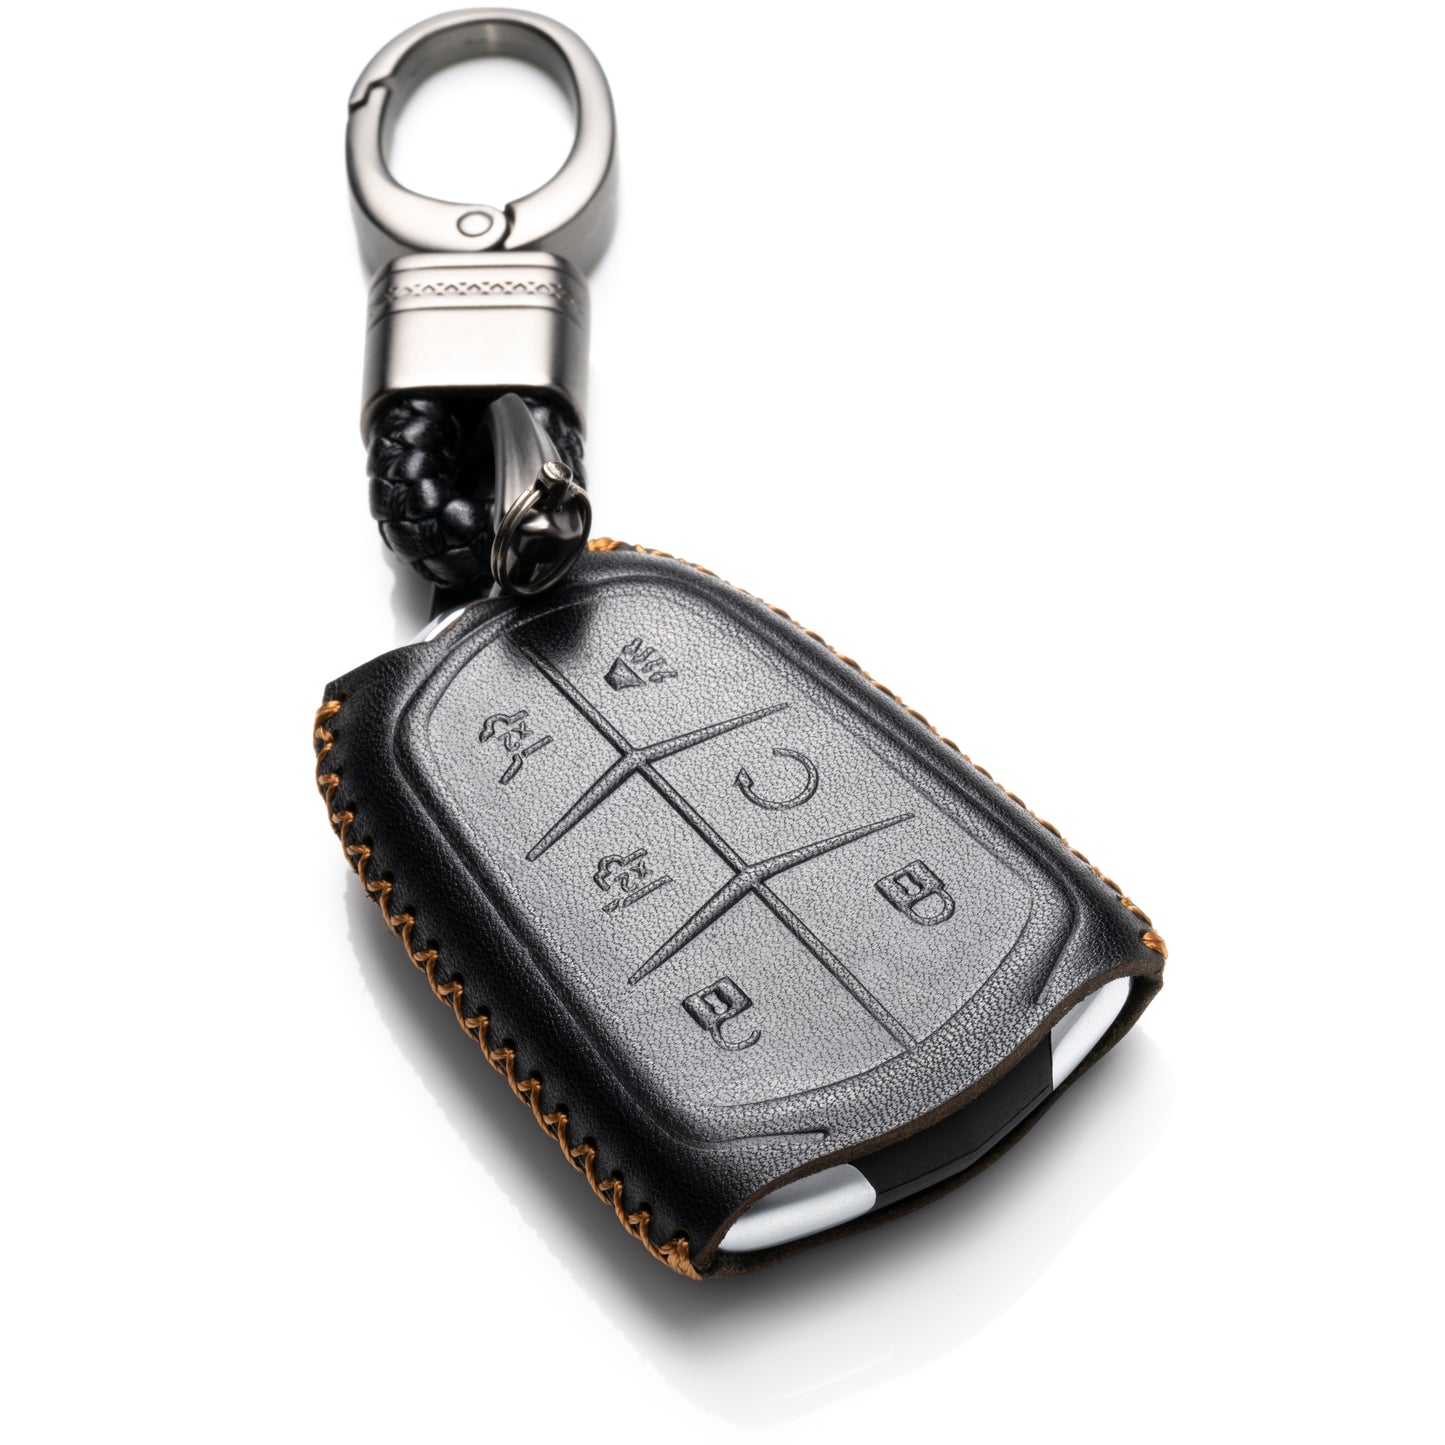 Vitodeco 6-Button Genuine Leather Smart Key Fob Case Cover Compatible for Cadillac ATS, CT6, CTS, SRX, XT5, XTS